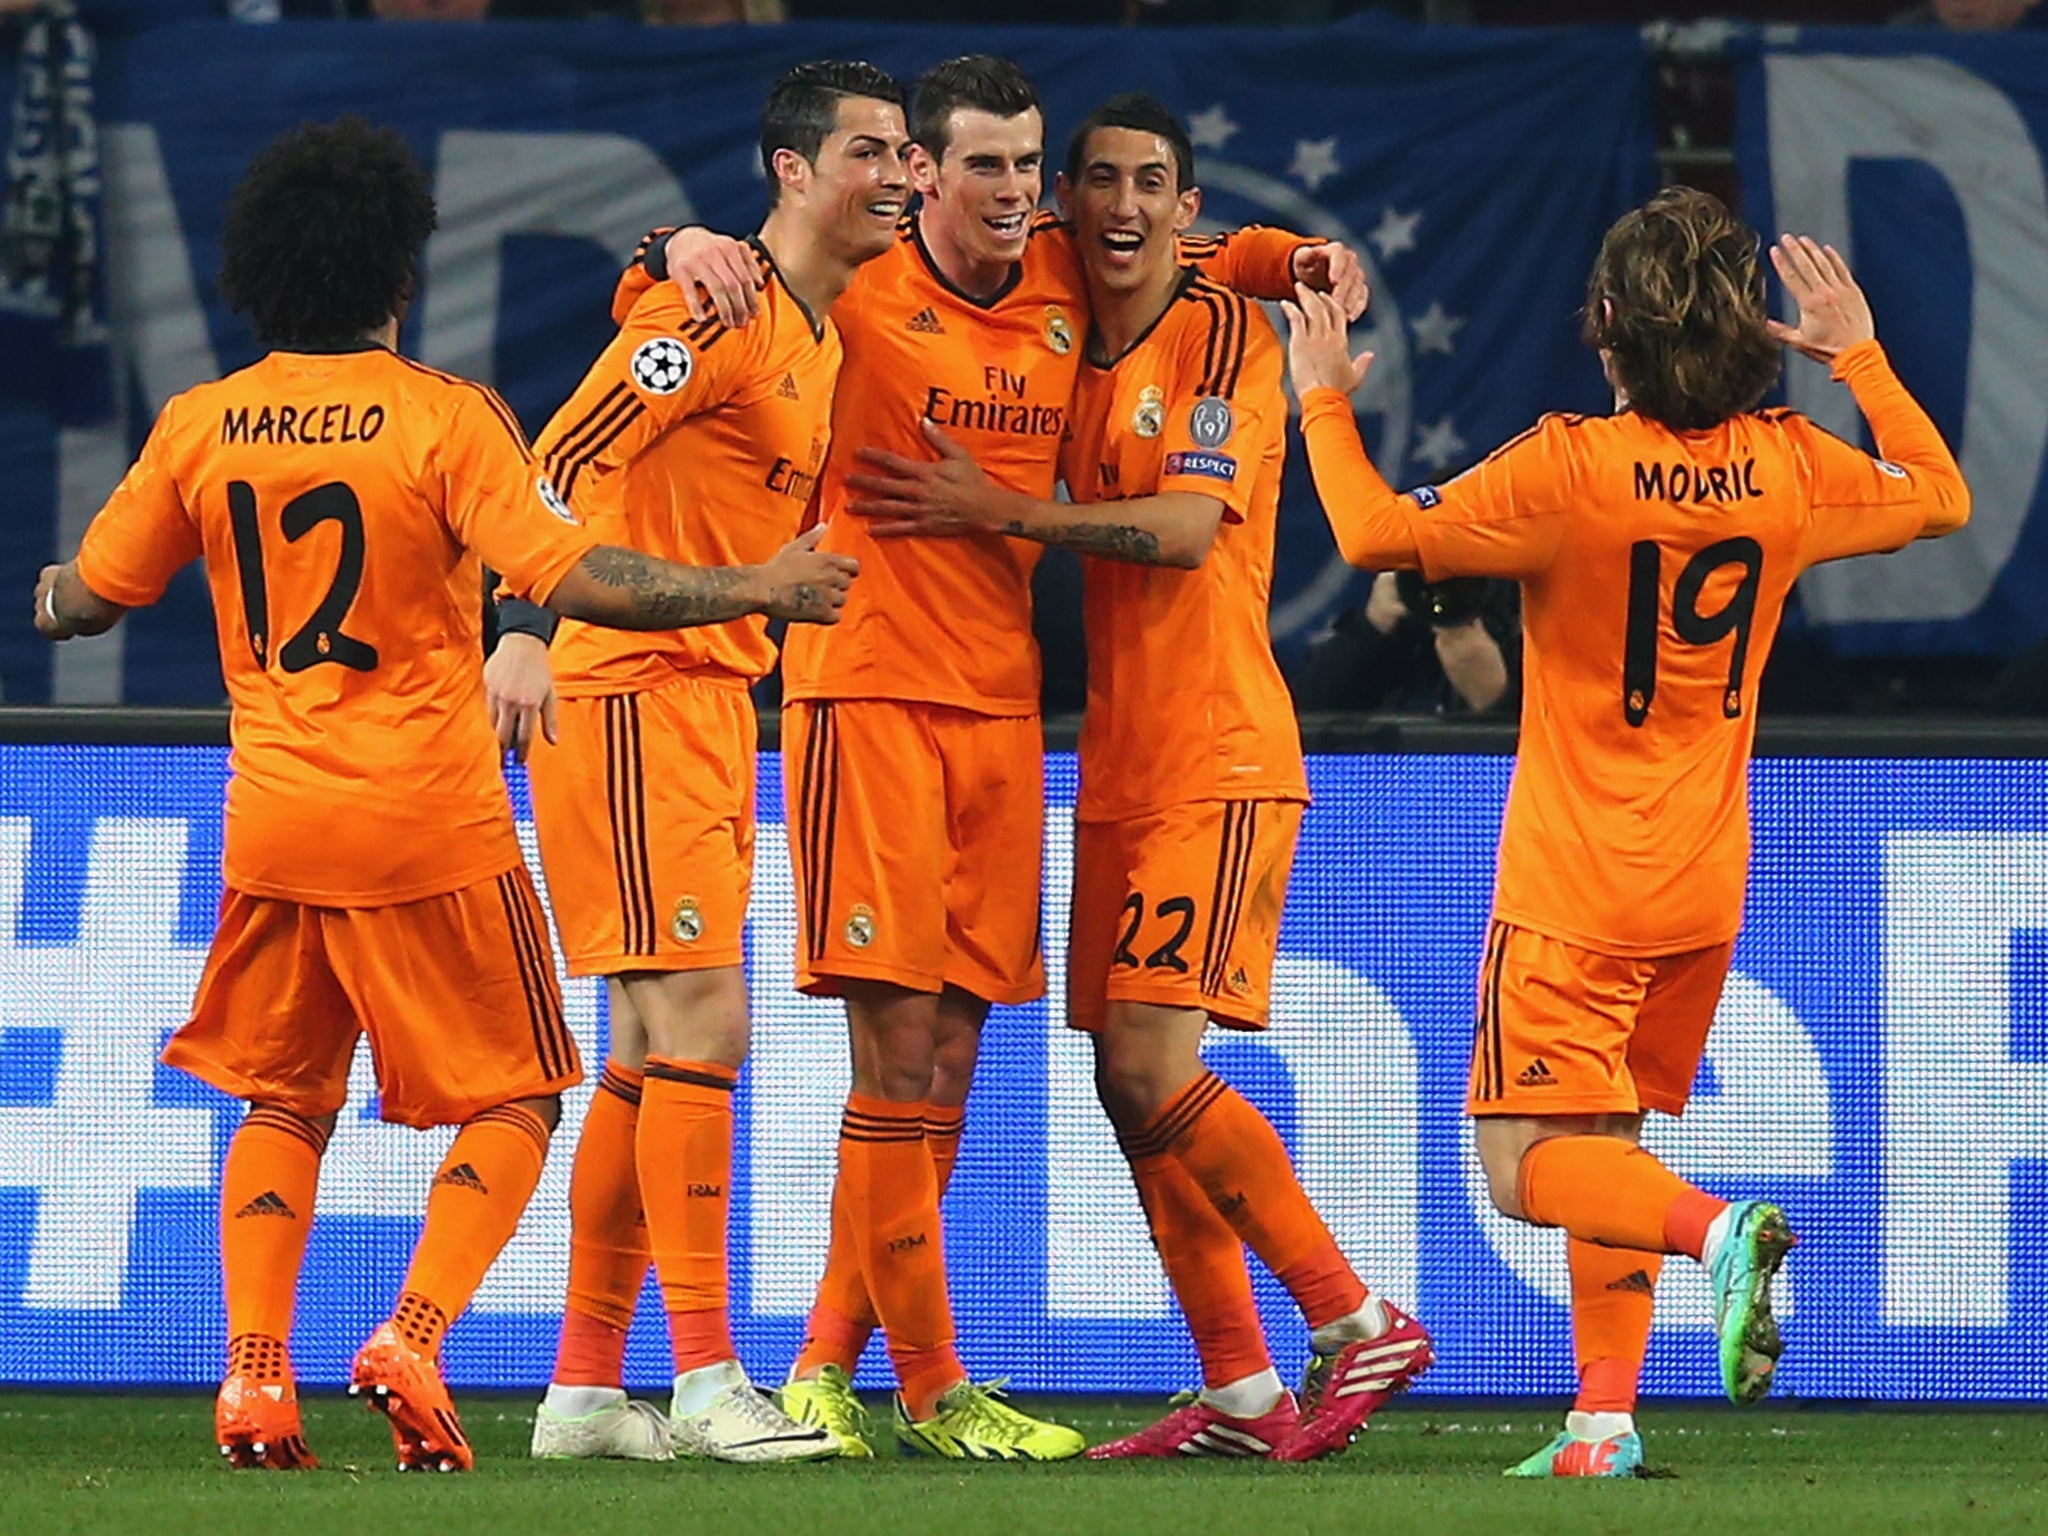 Gareth Bale celebrates with Cristiano Ronaldo and Angel Di Maria after scoring in the 6-1 rout of Schalke